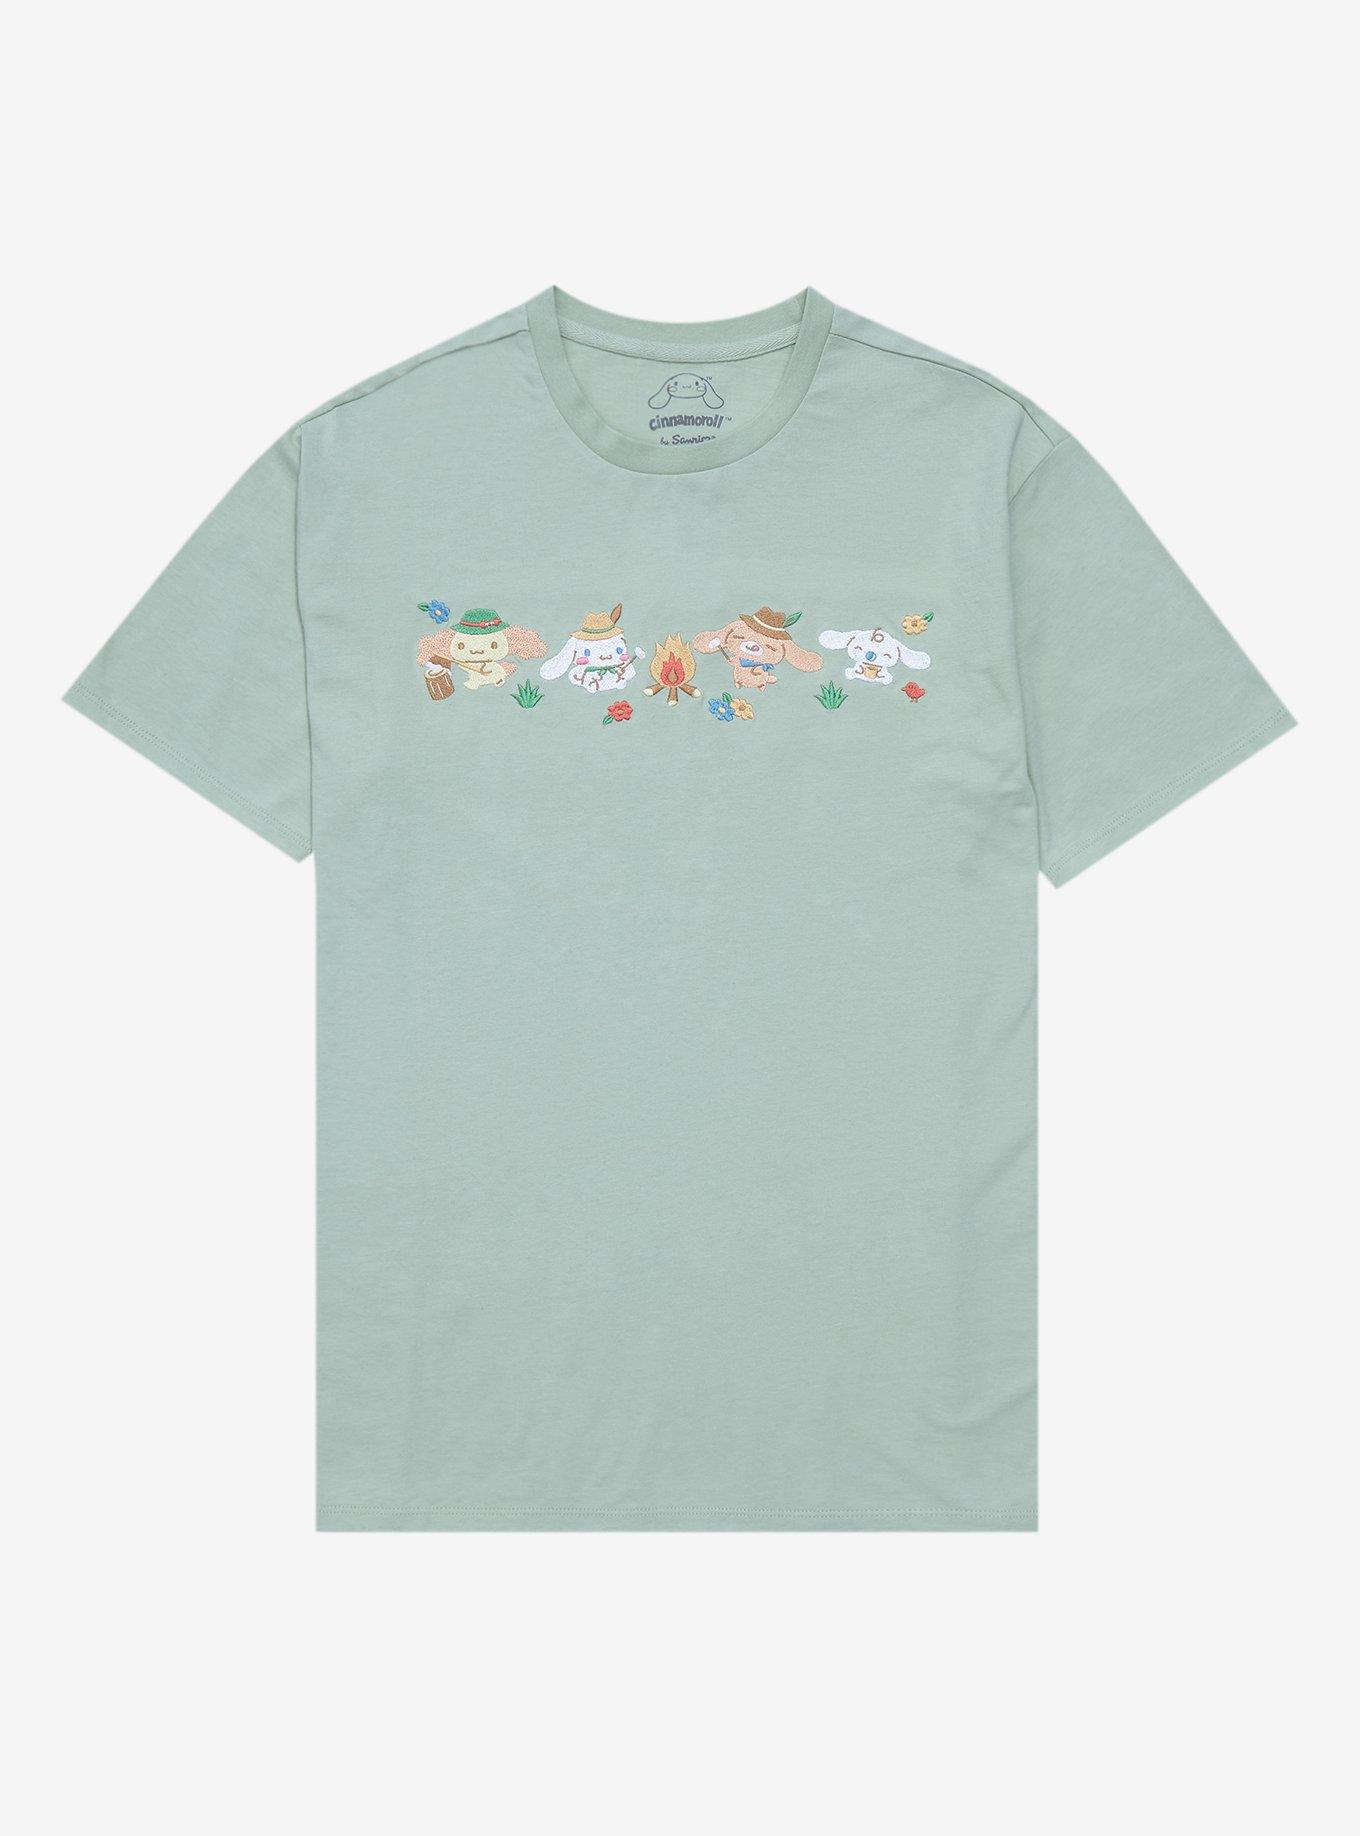 Sanrio Cinnamoroll Camping Group Portrait T-Shirt - BoxLunch Exclusive ...